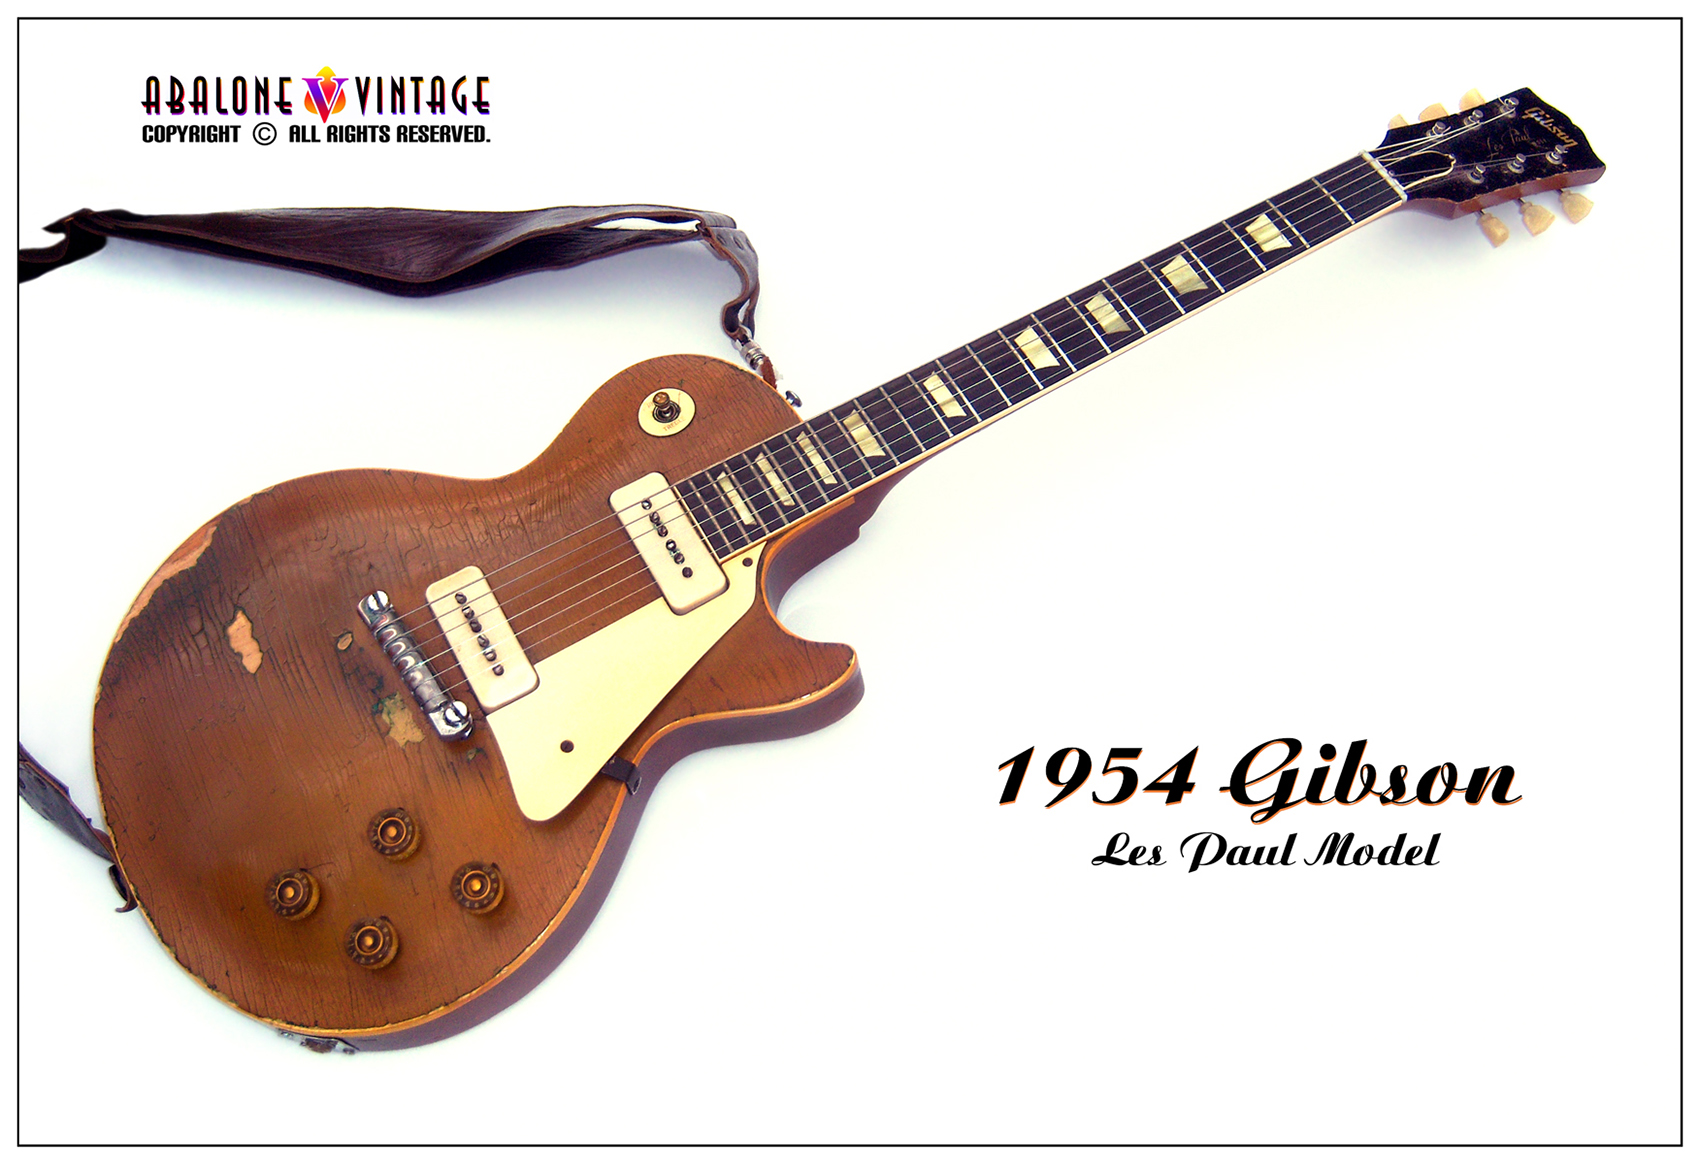 1954 Gibson Les Paul Standard Model Guitar. The well loved and worn road warrior.